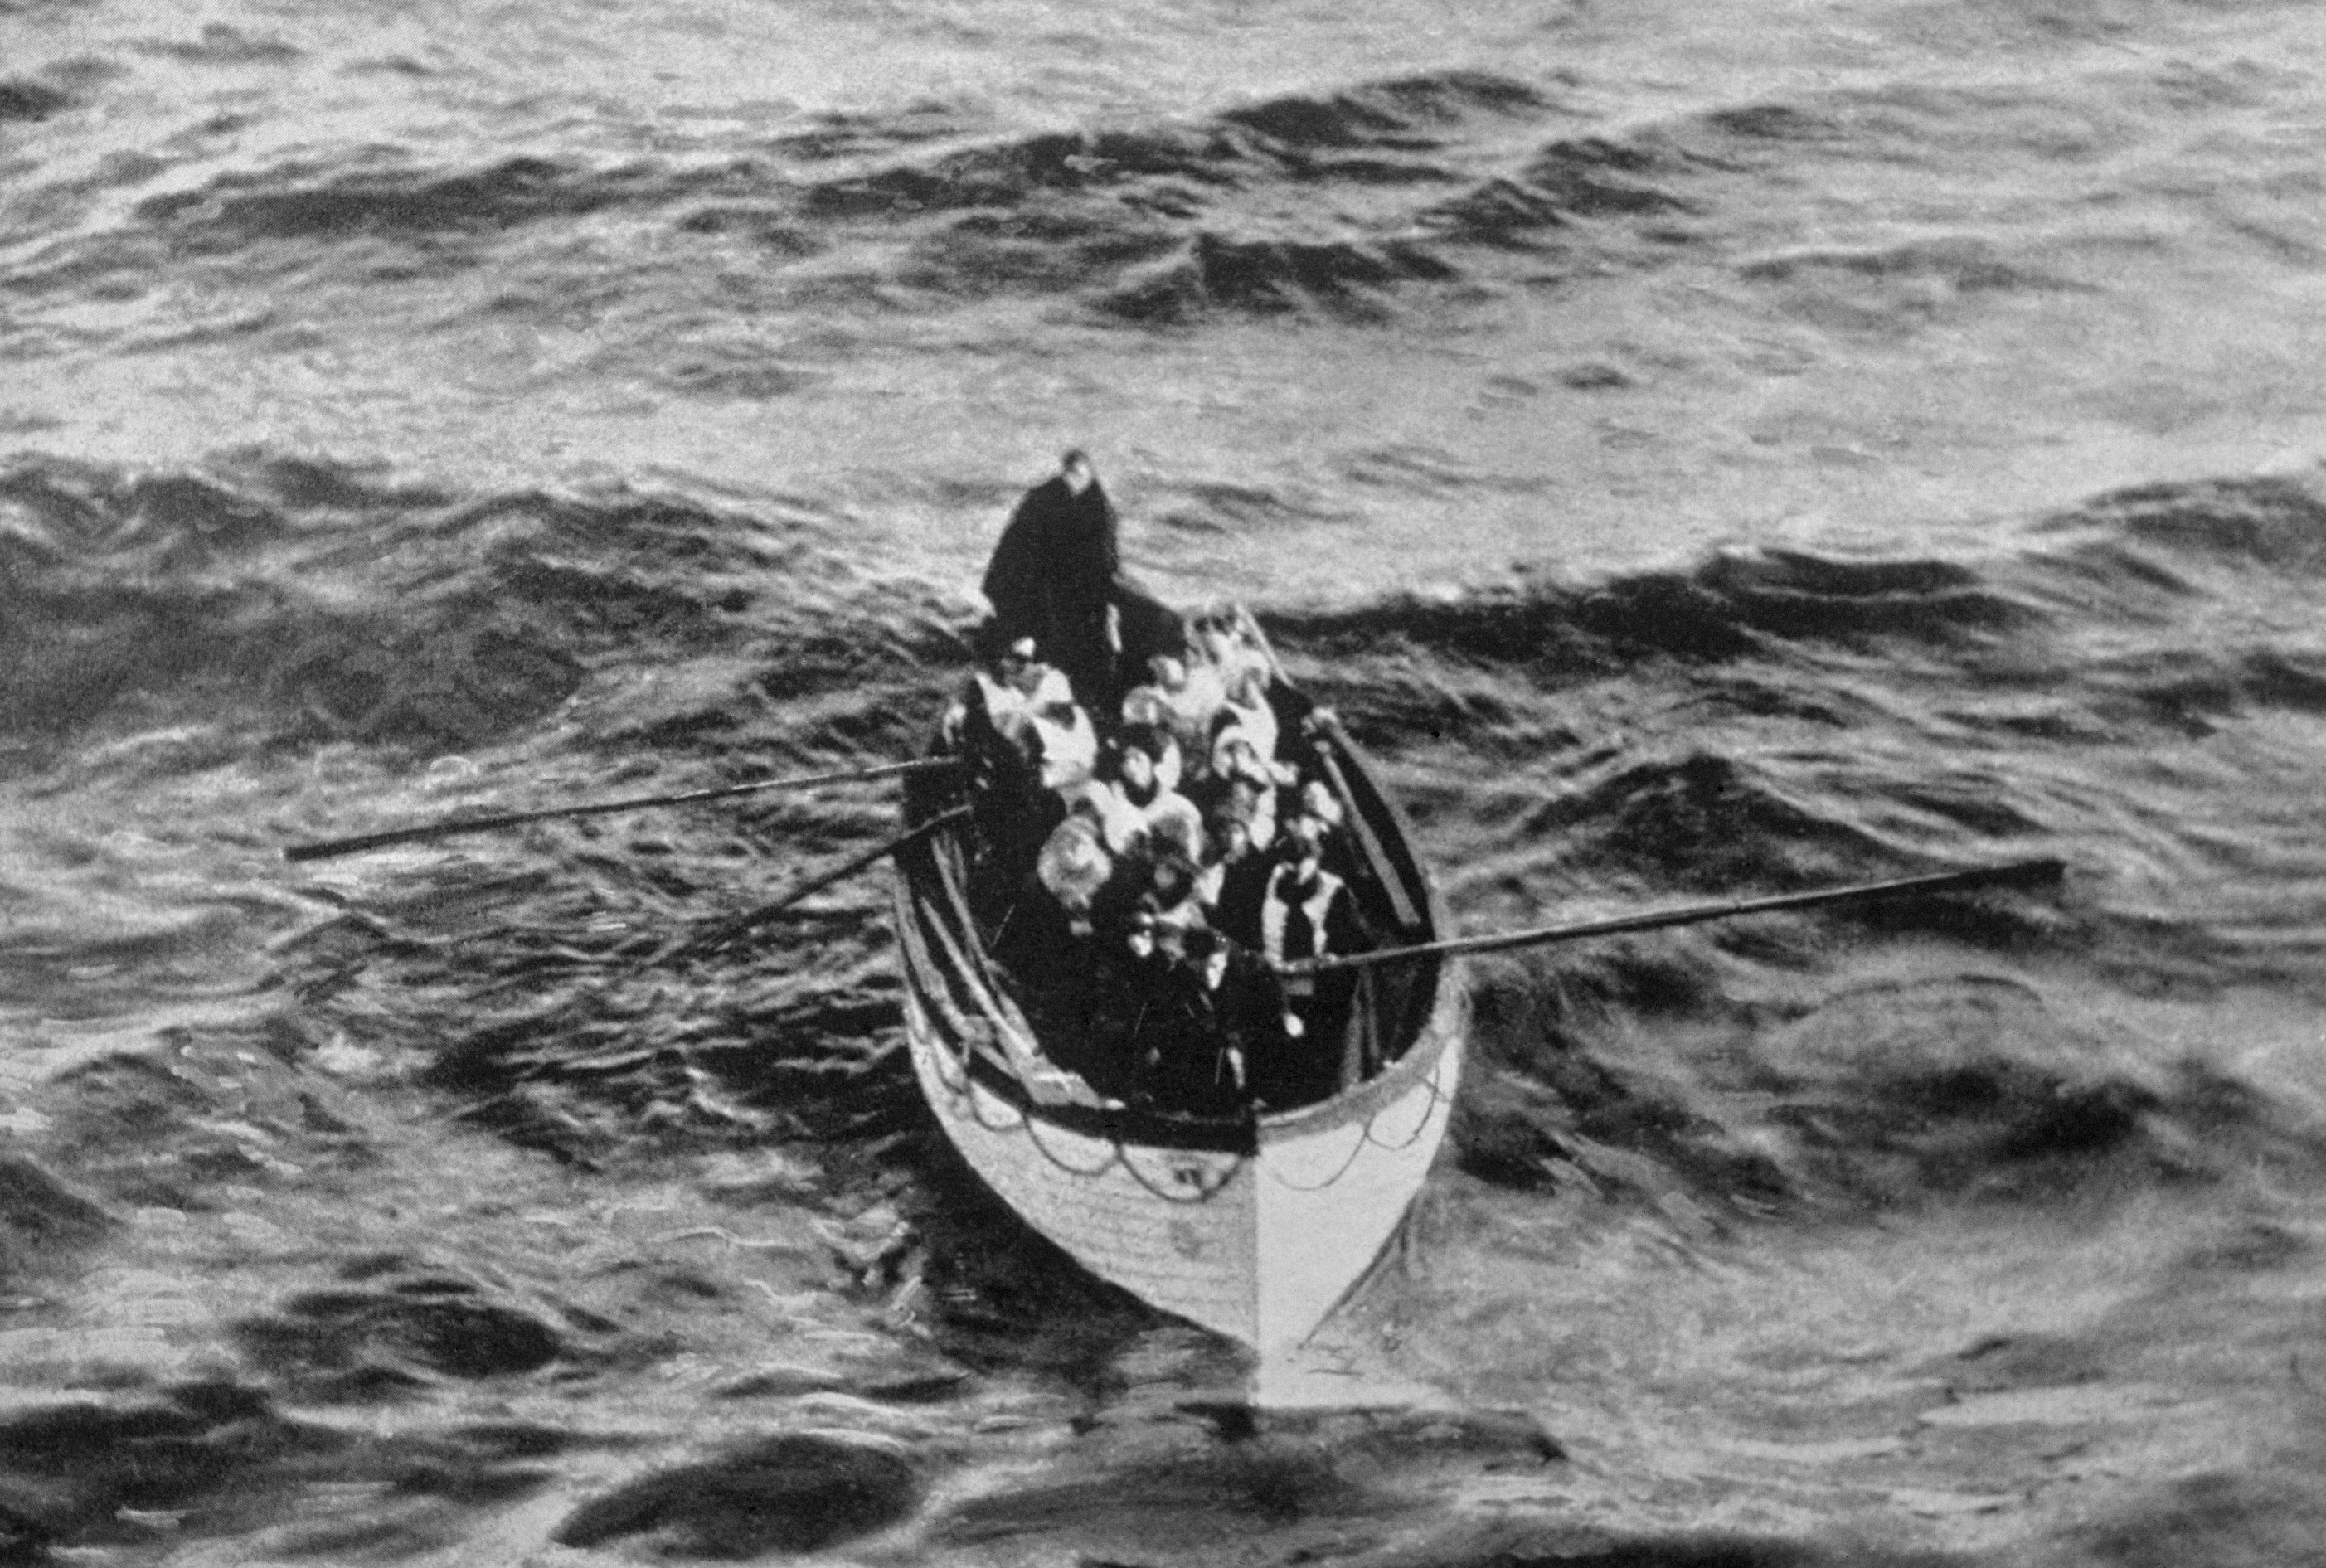 A lifeboat filled with survivors